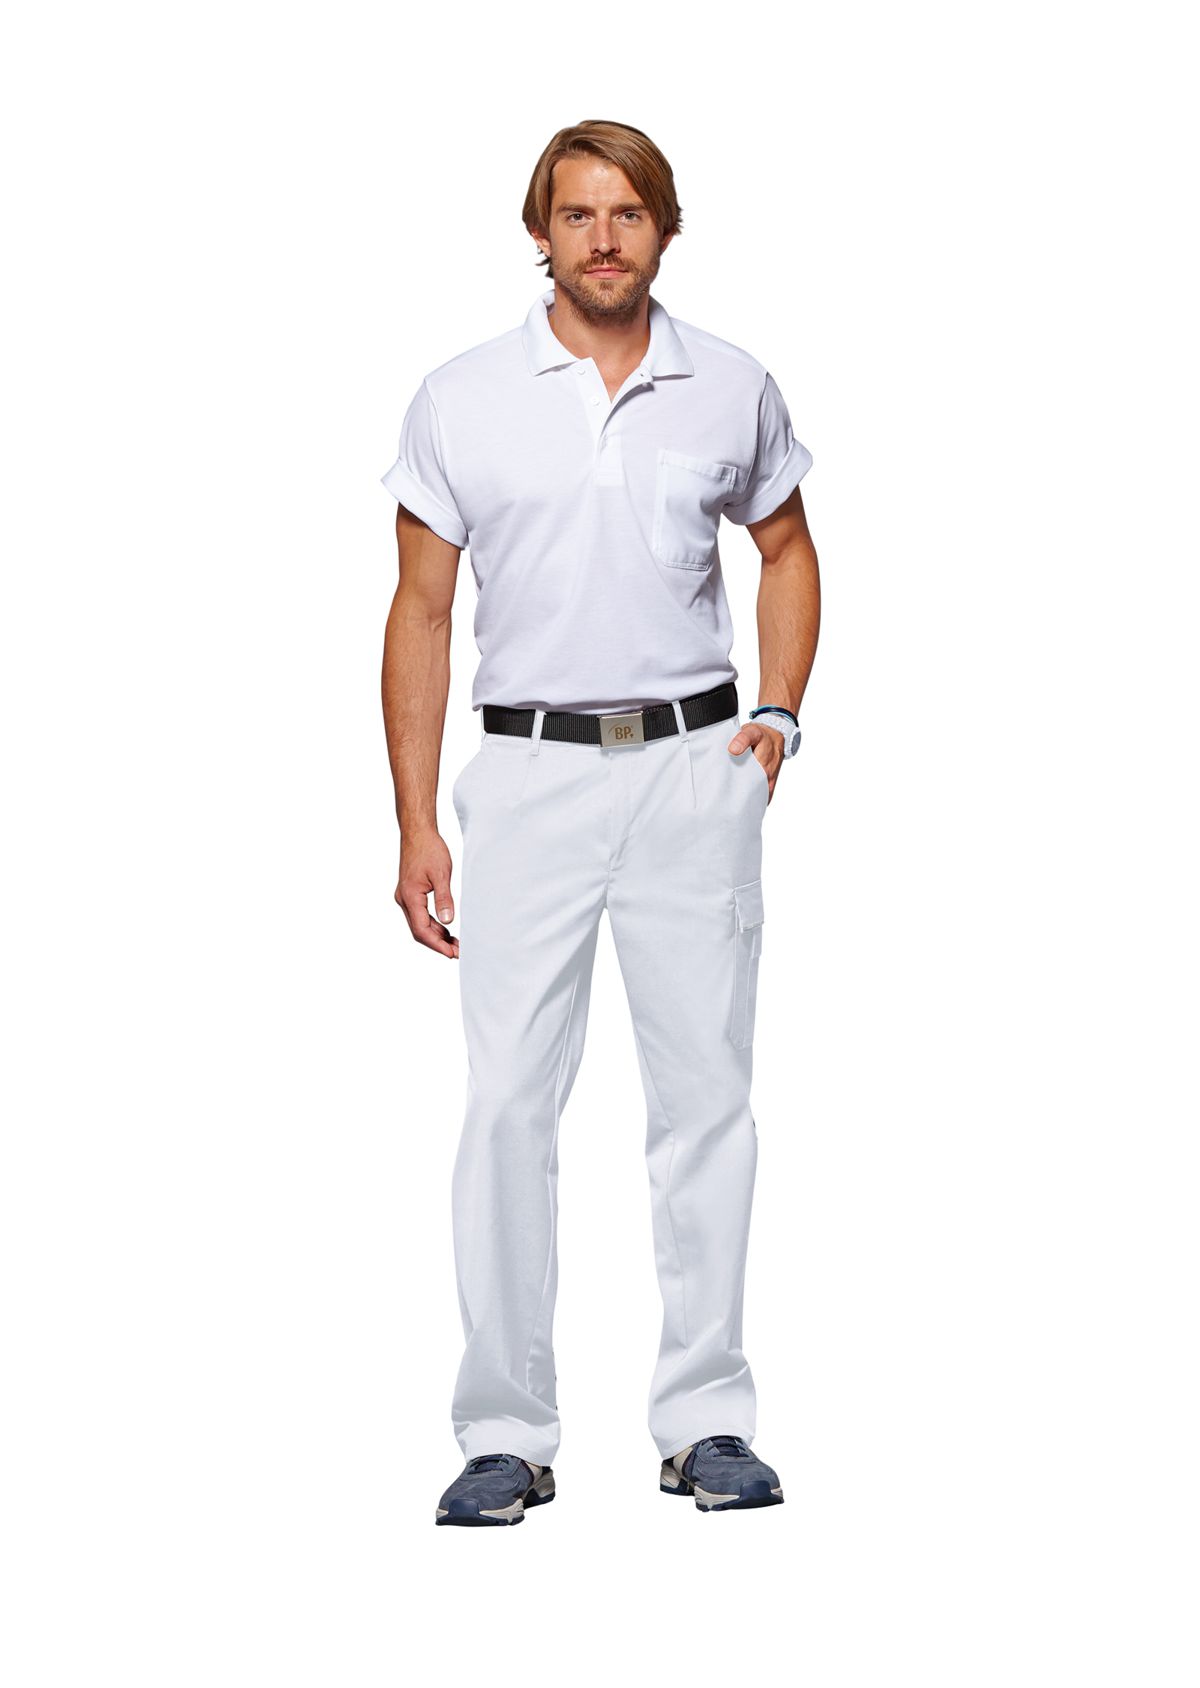 BP® Work trousers with concealed buttons